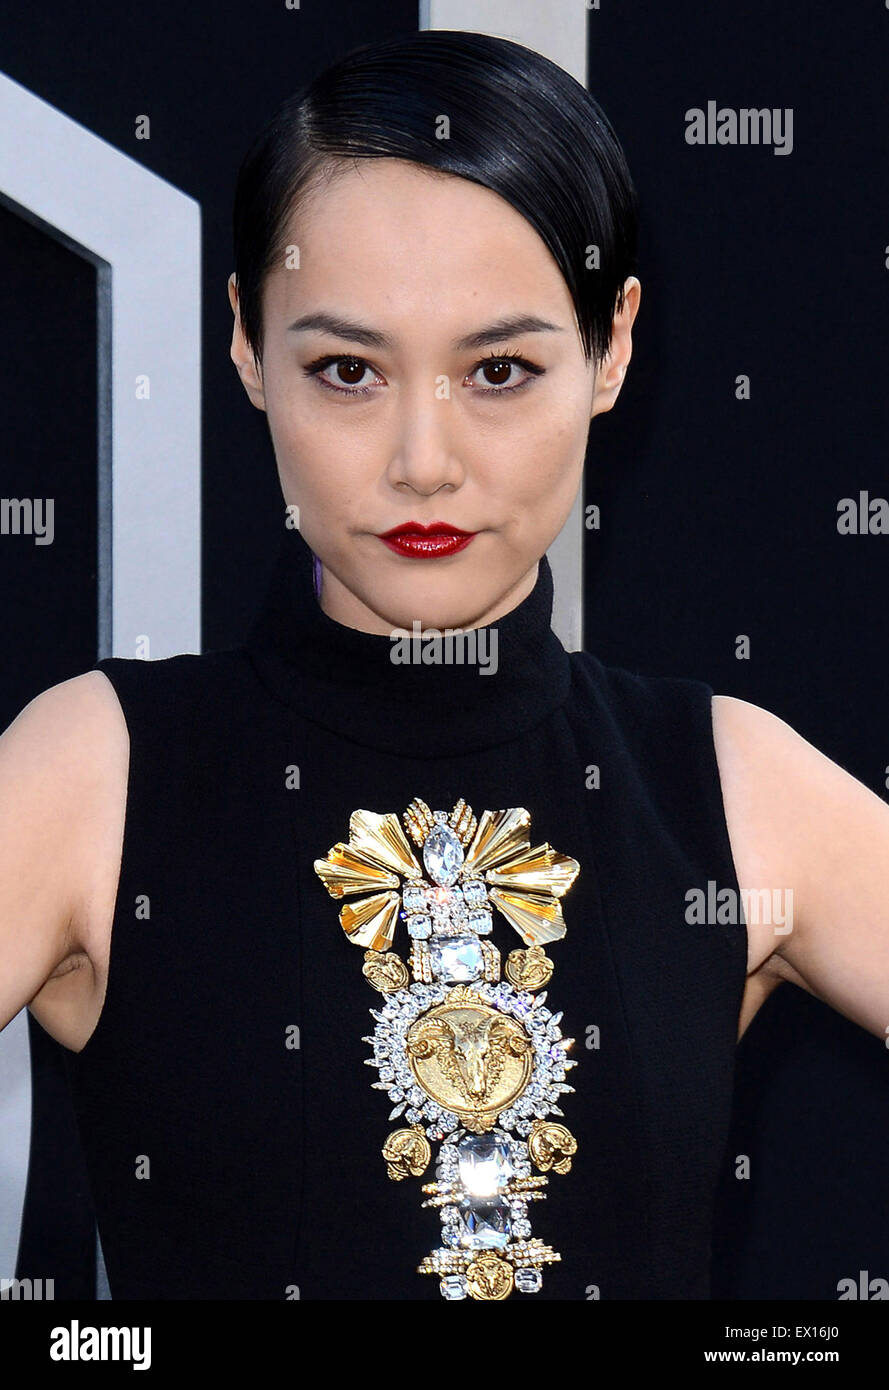 Rinko Kikuchi at the Los Angeles premiere of 'Pacific Rim' held at the Dolby Theatre in Hollywood on July 9, 2013. Stock Photo